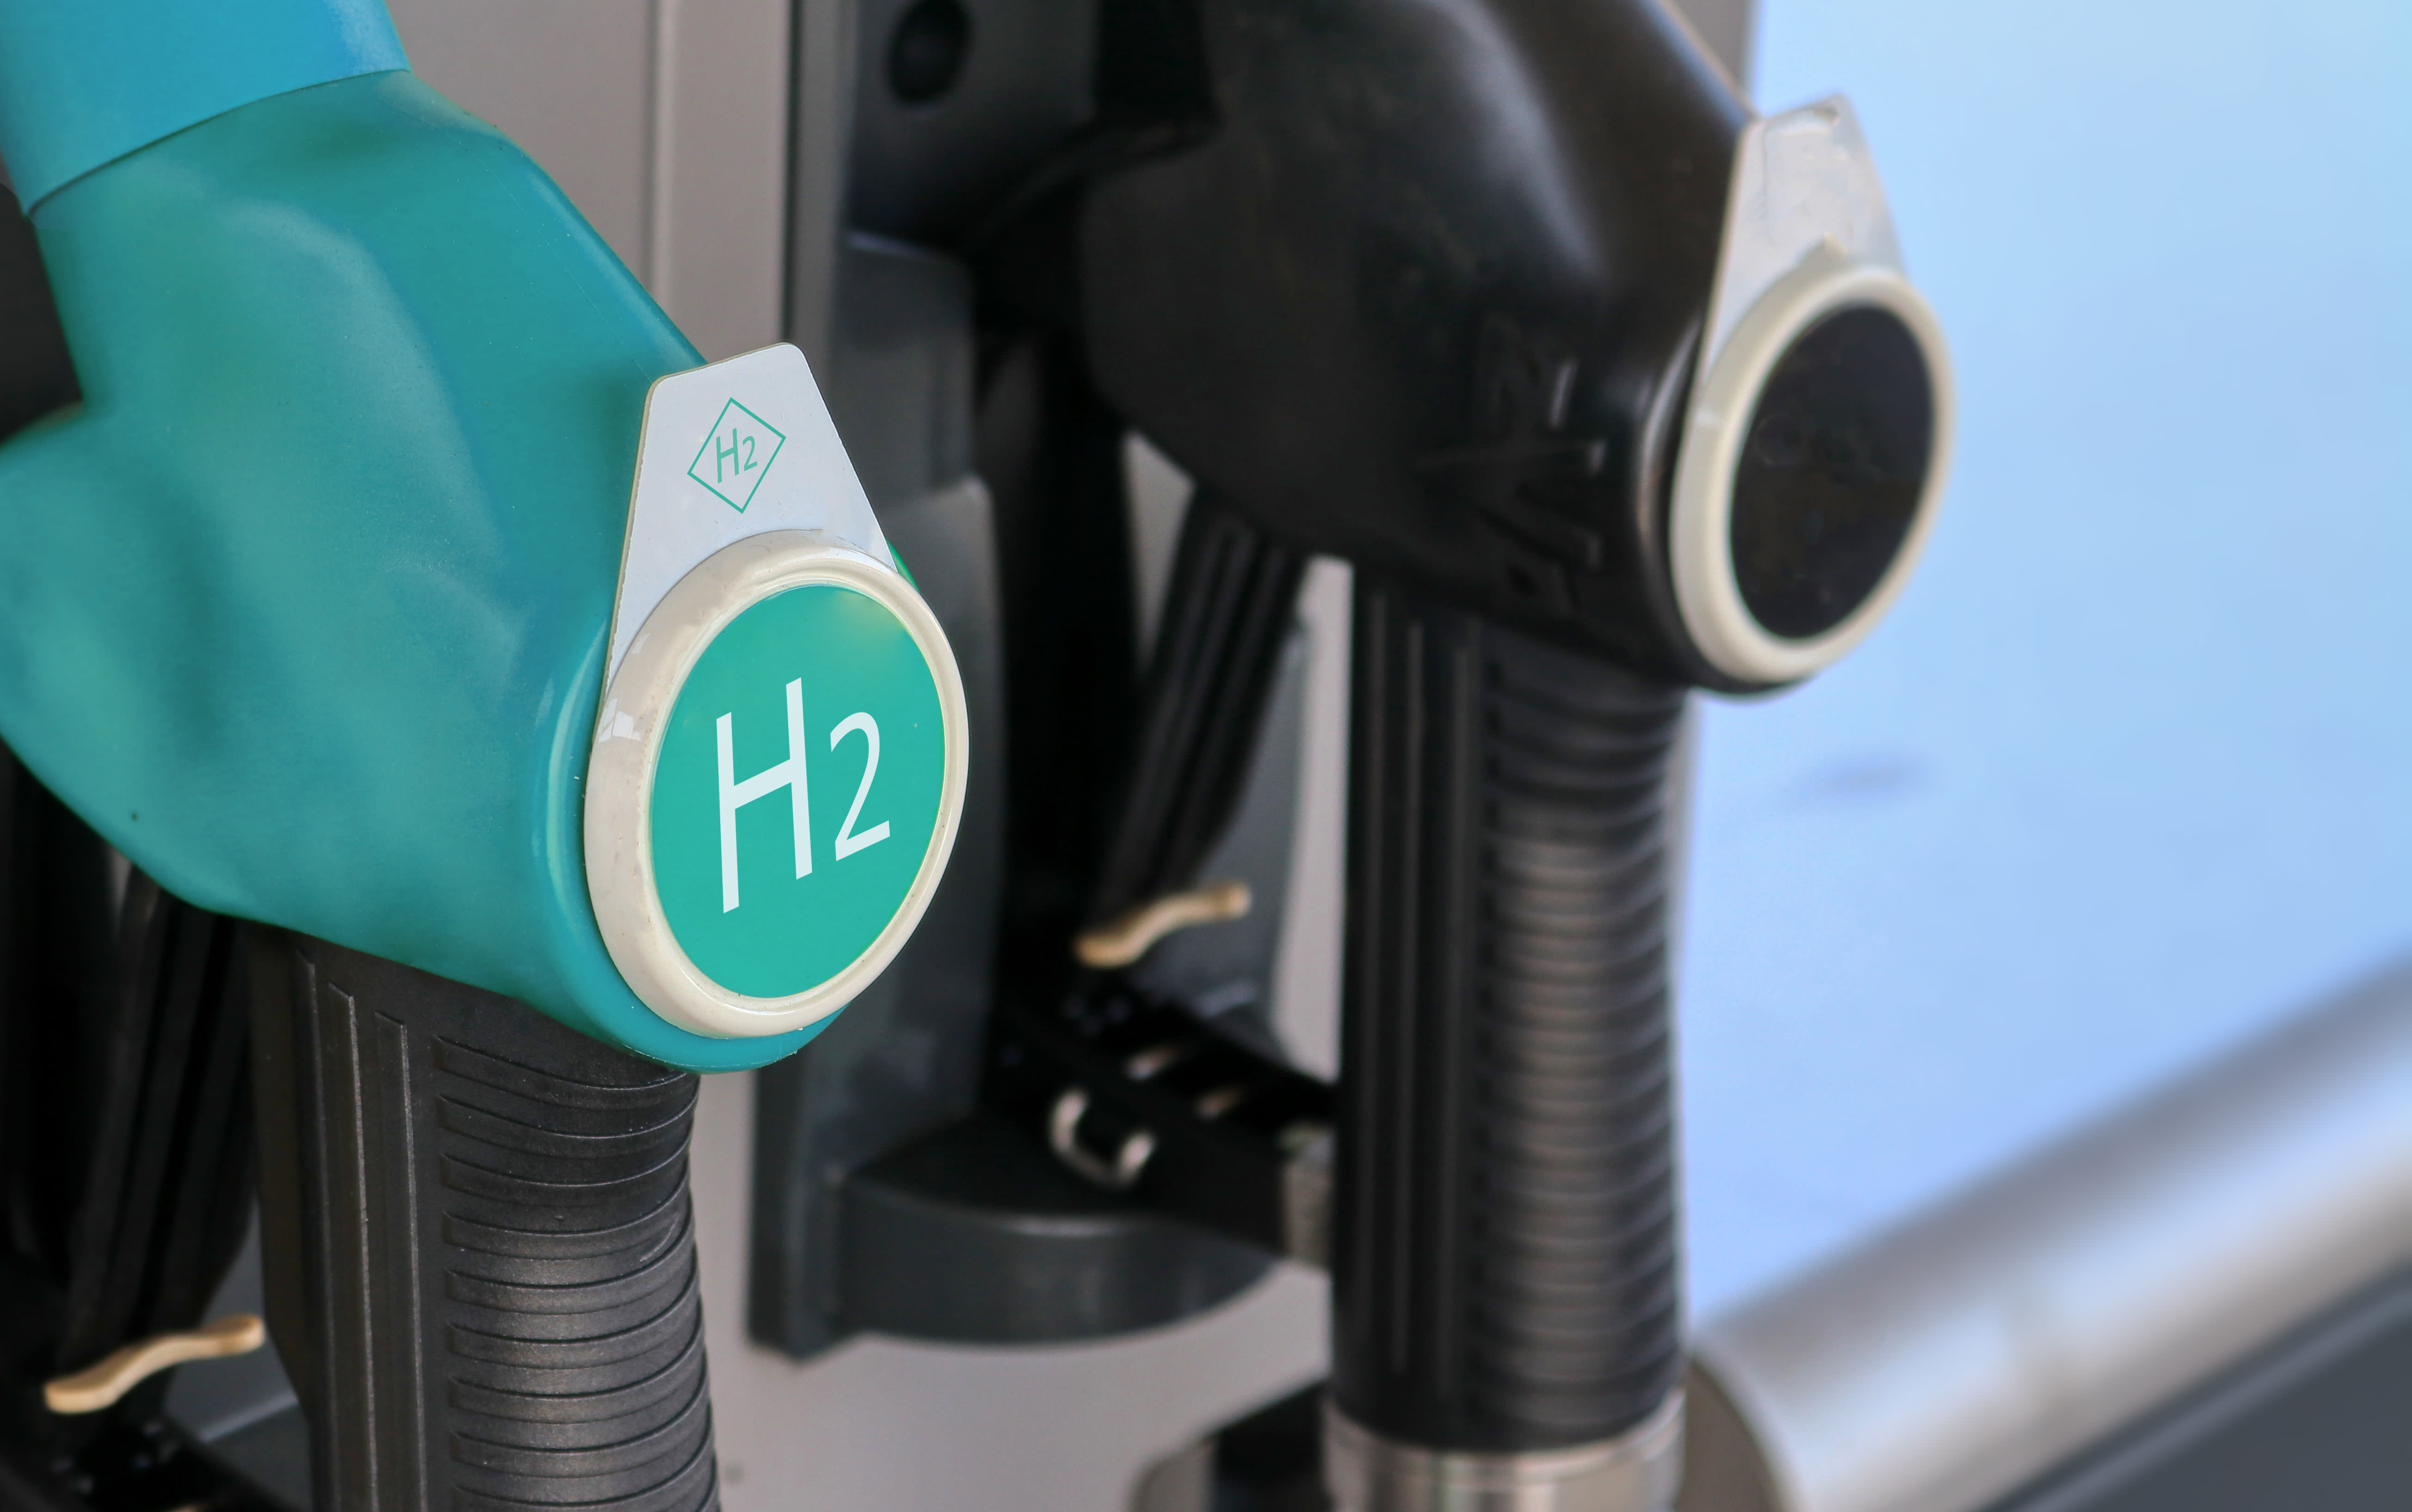 Goldman predicts clean hydrogen will be a $1 trillion market. Here's how to play it.